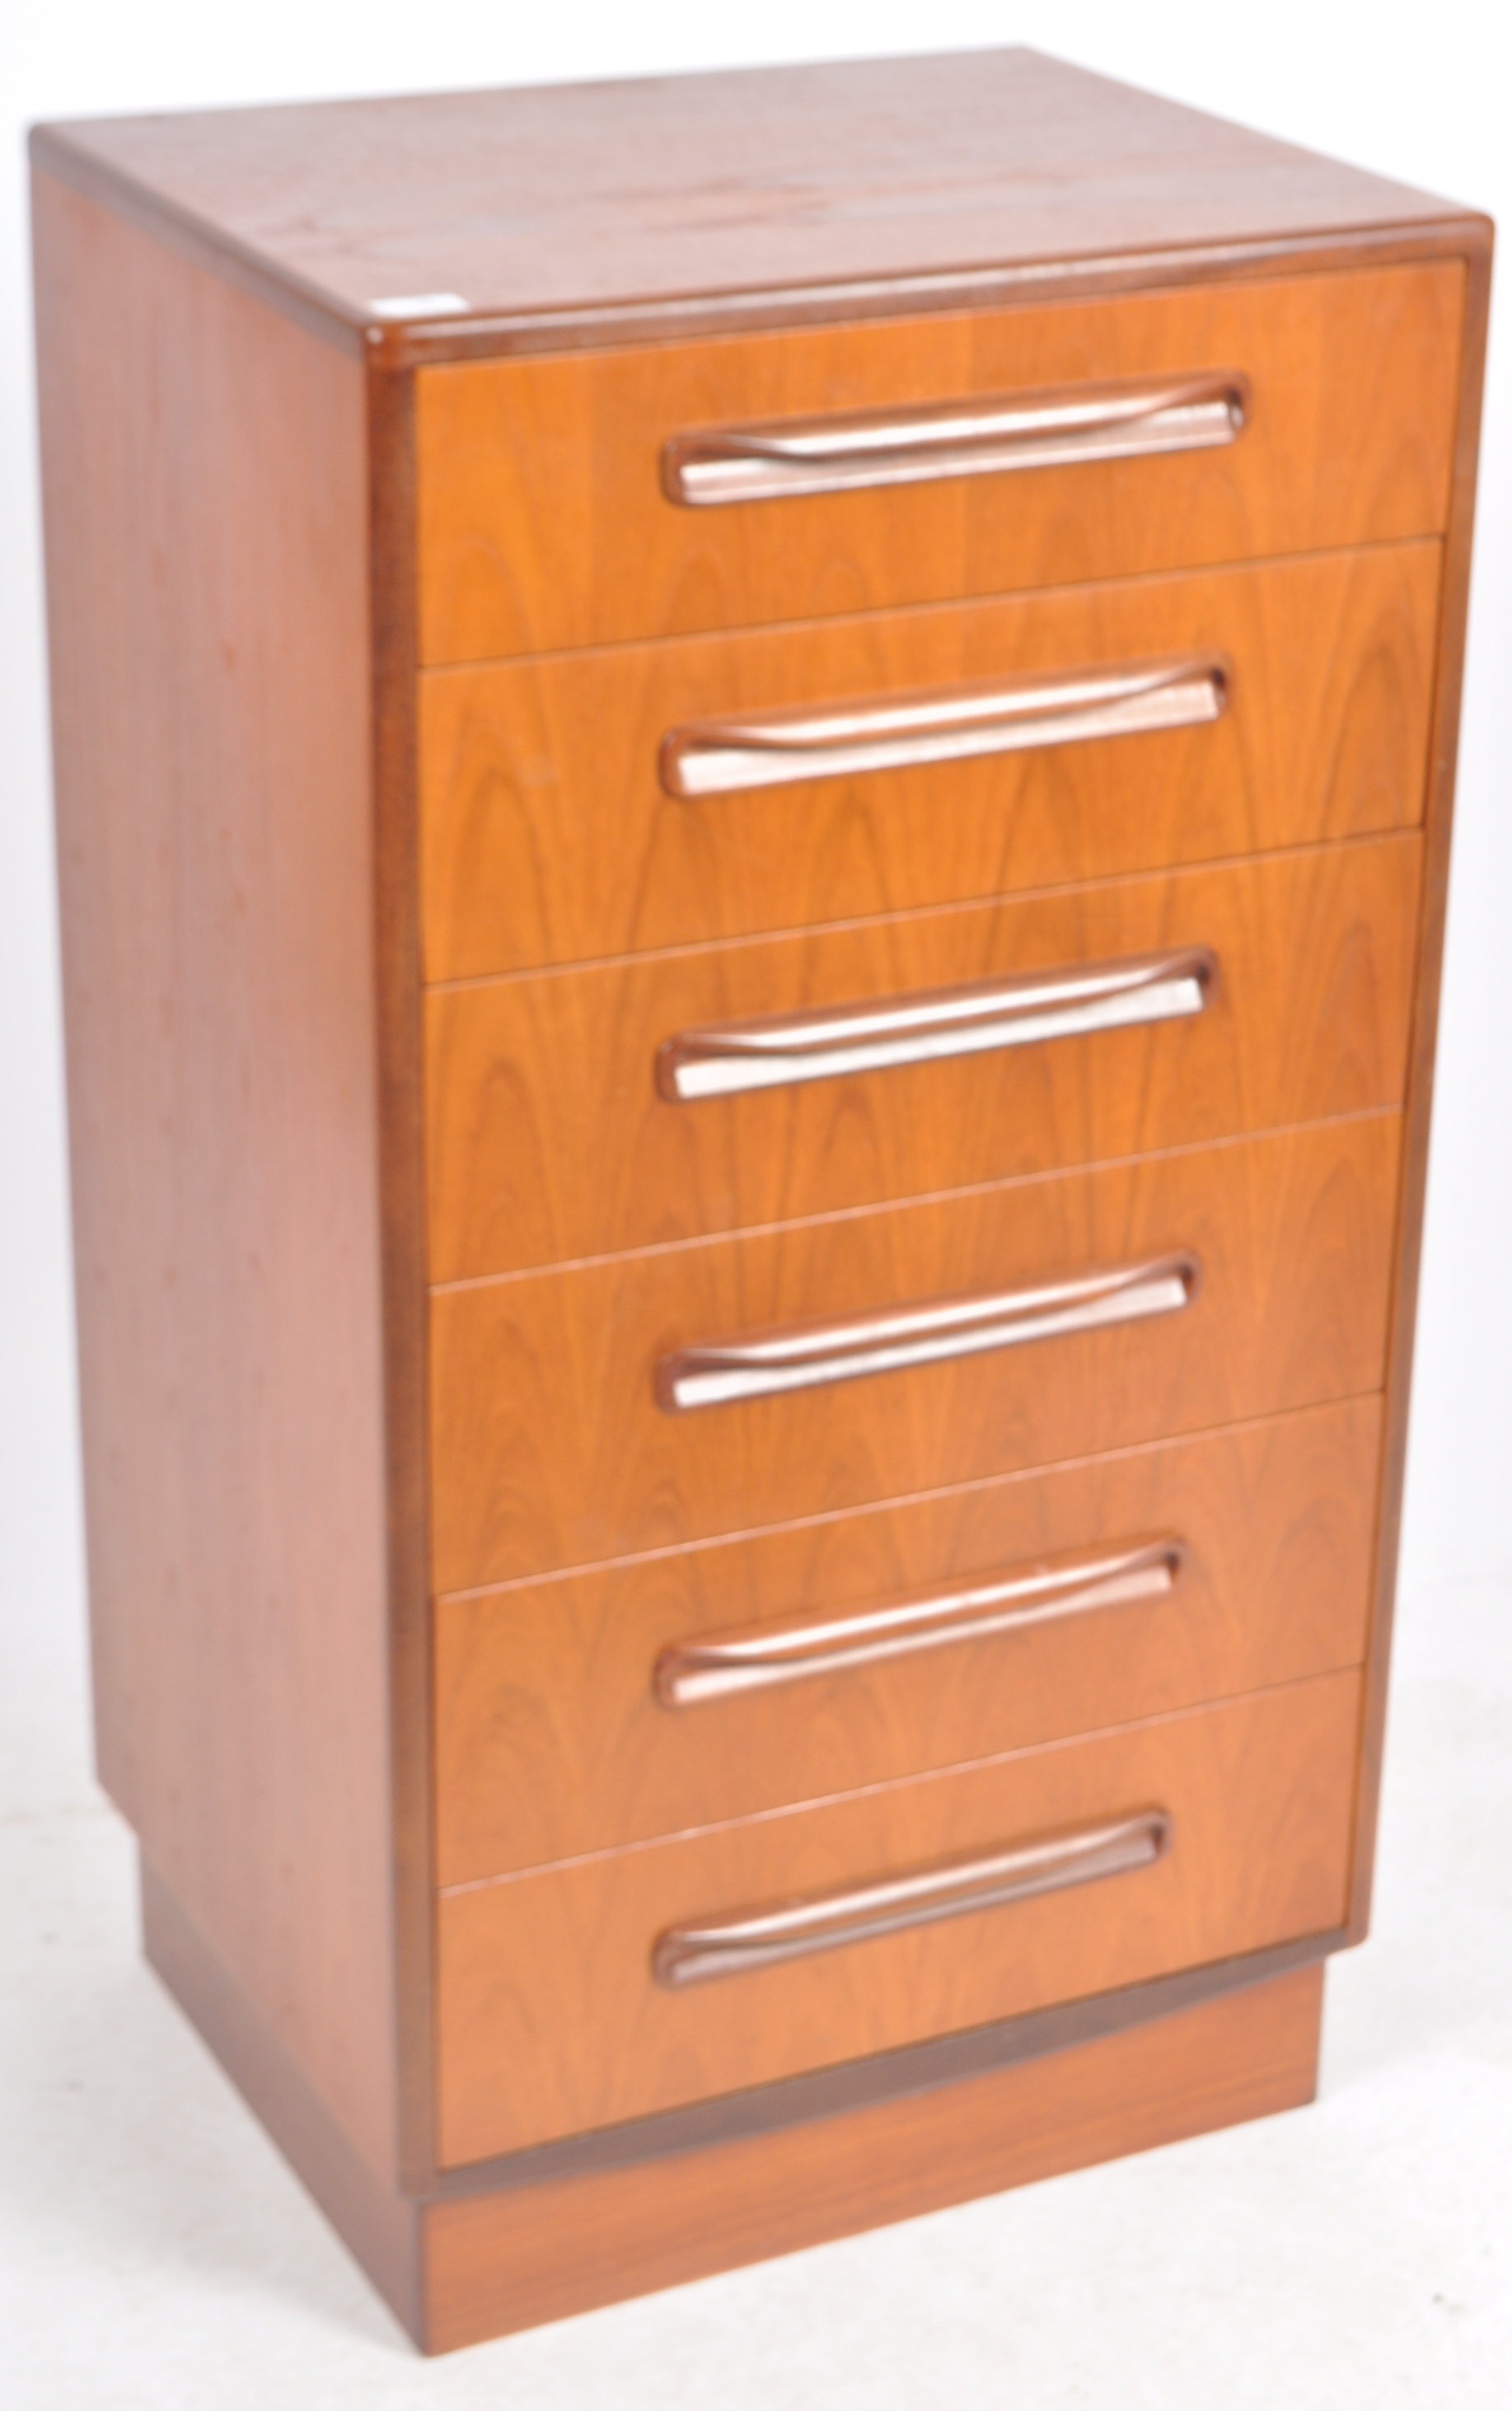 VICTOR WILKINS FOR G PLAN - 1960S SIX DRAWER CHEST - Image 2 of 10